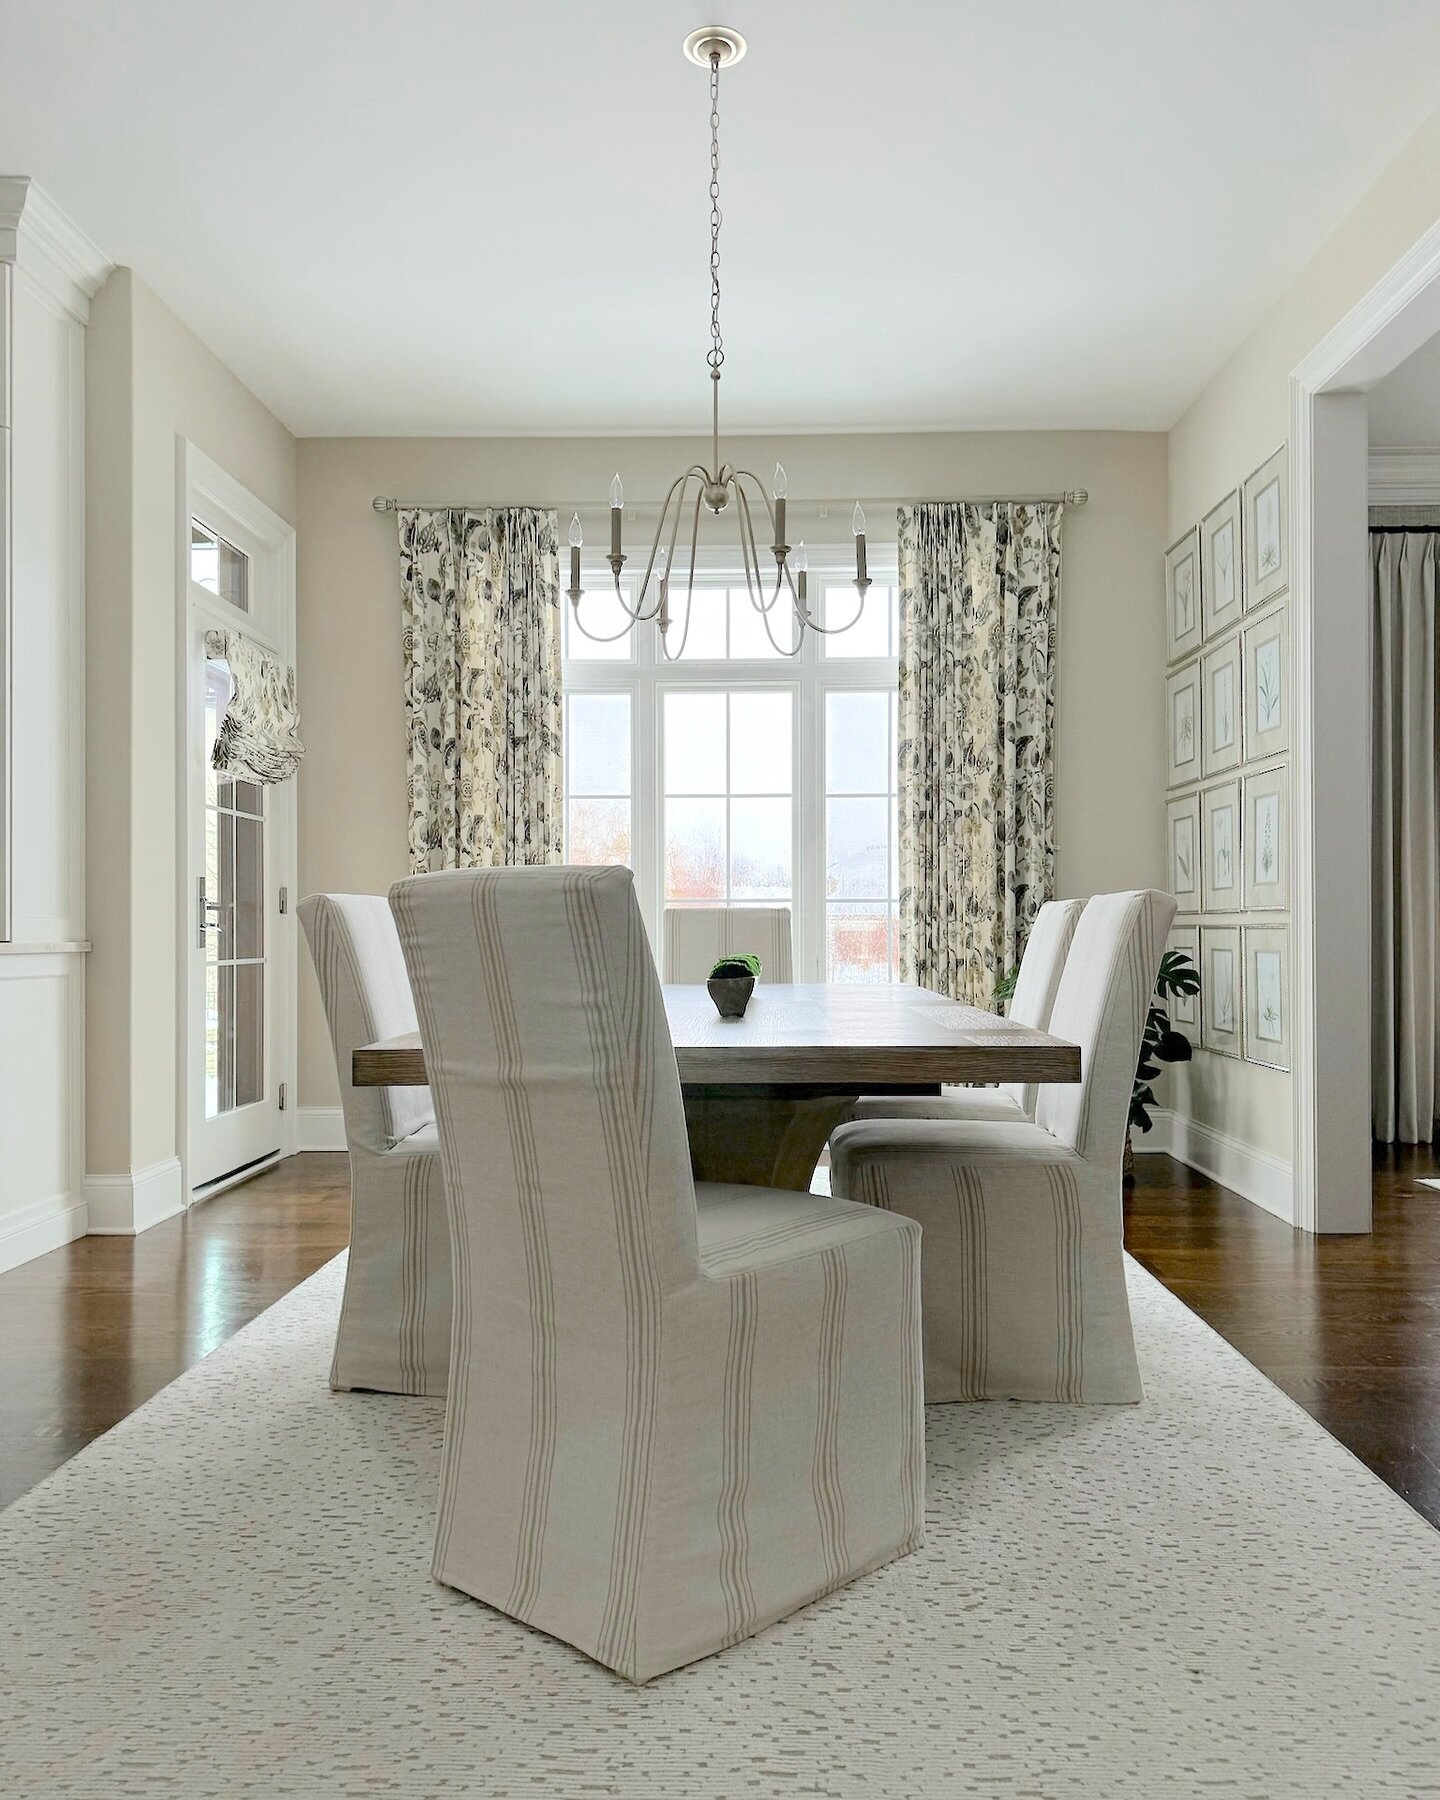 A dining area with a transitional style! We paired the floral draperies with the striped slipcover chairs and finished the look with a timeless light fixture.
Oh and the feel good textured rug was a must to soften the furniture! 😊 #imaginethatdesign